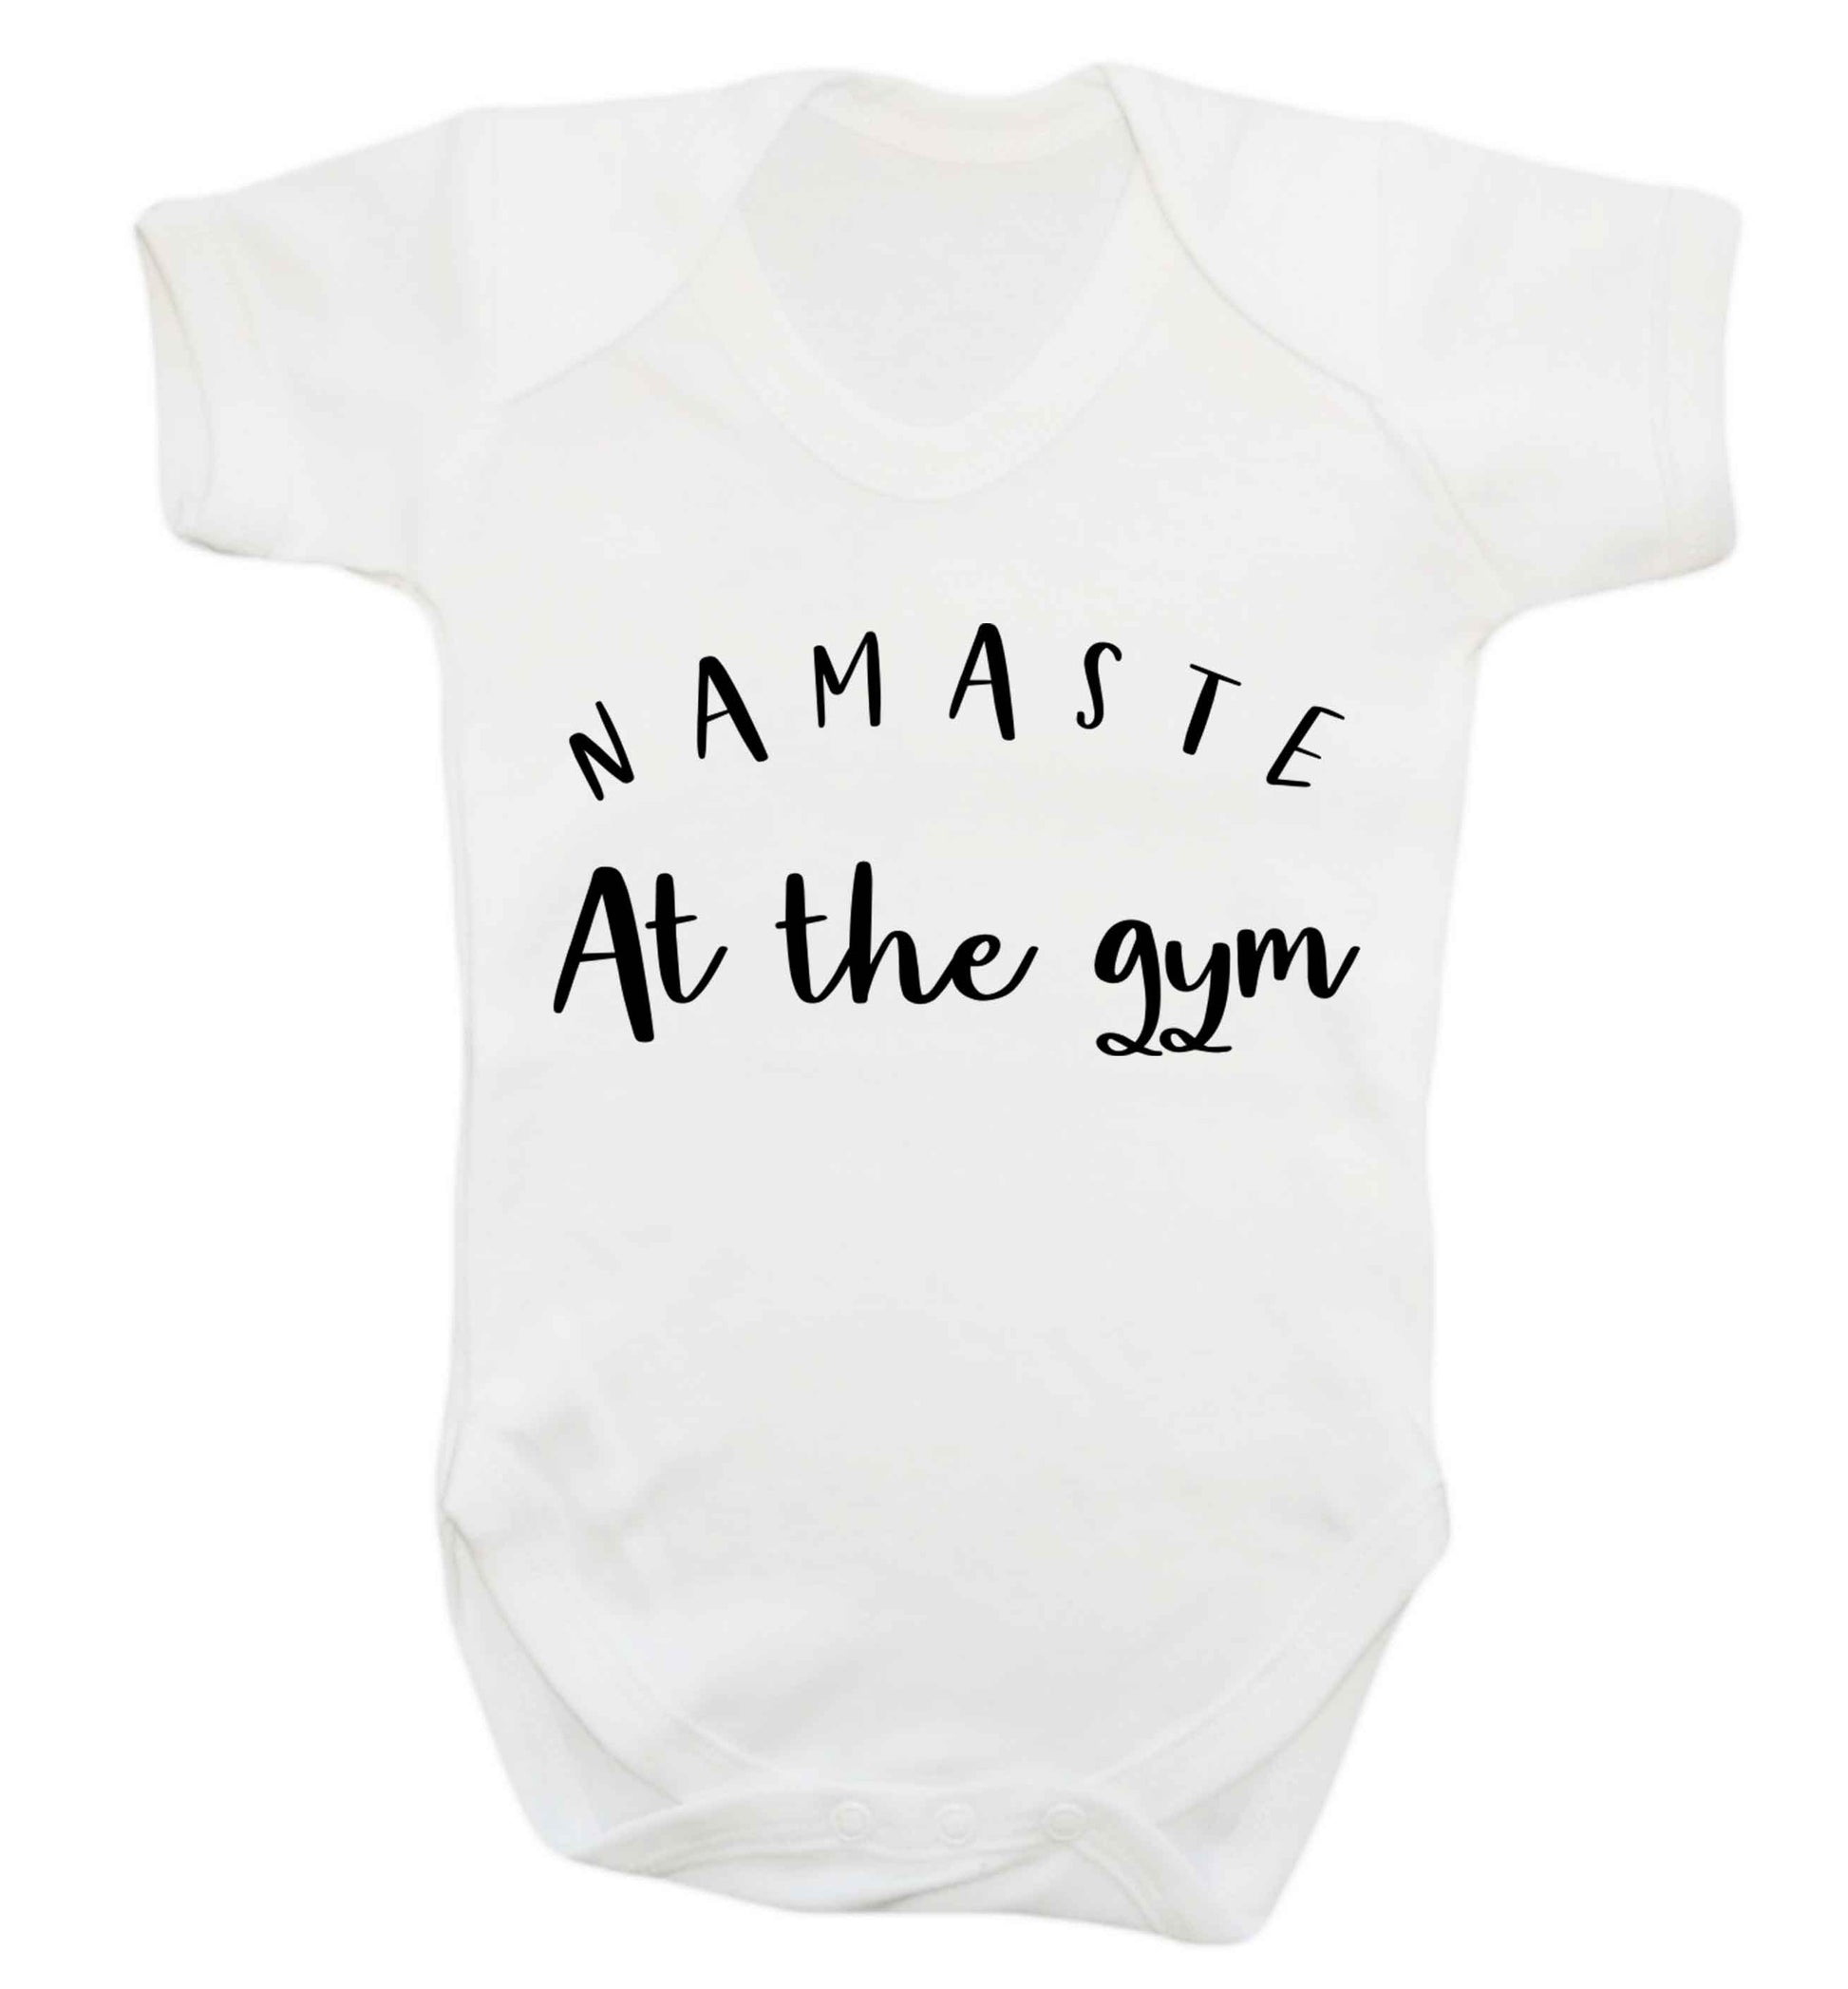 Namaste at the gym Baby Vest white 18-24 months